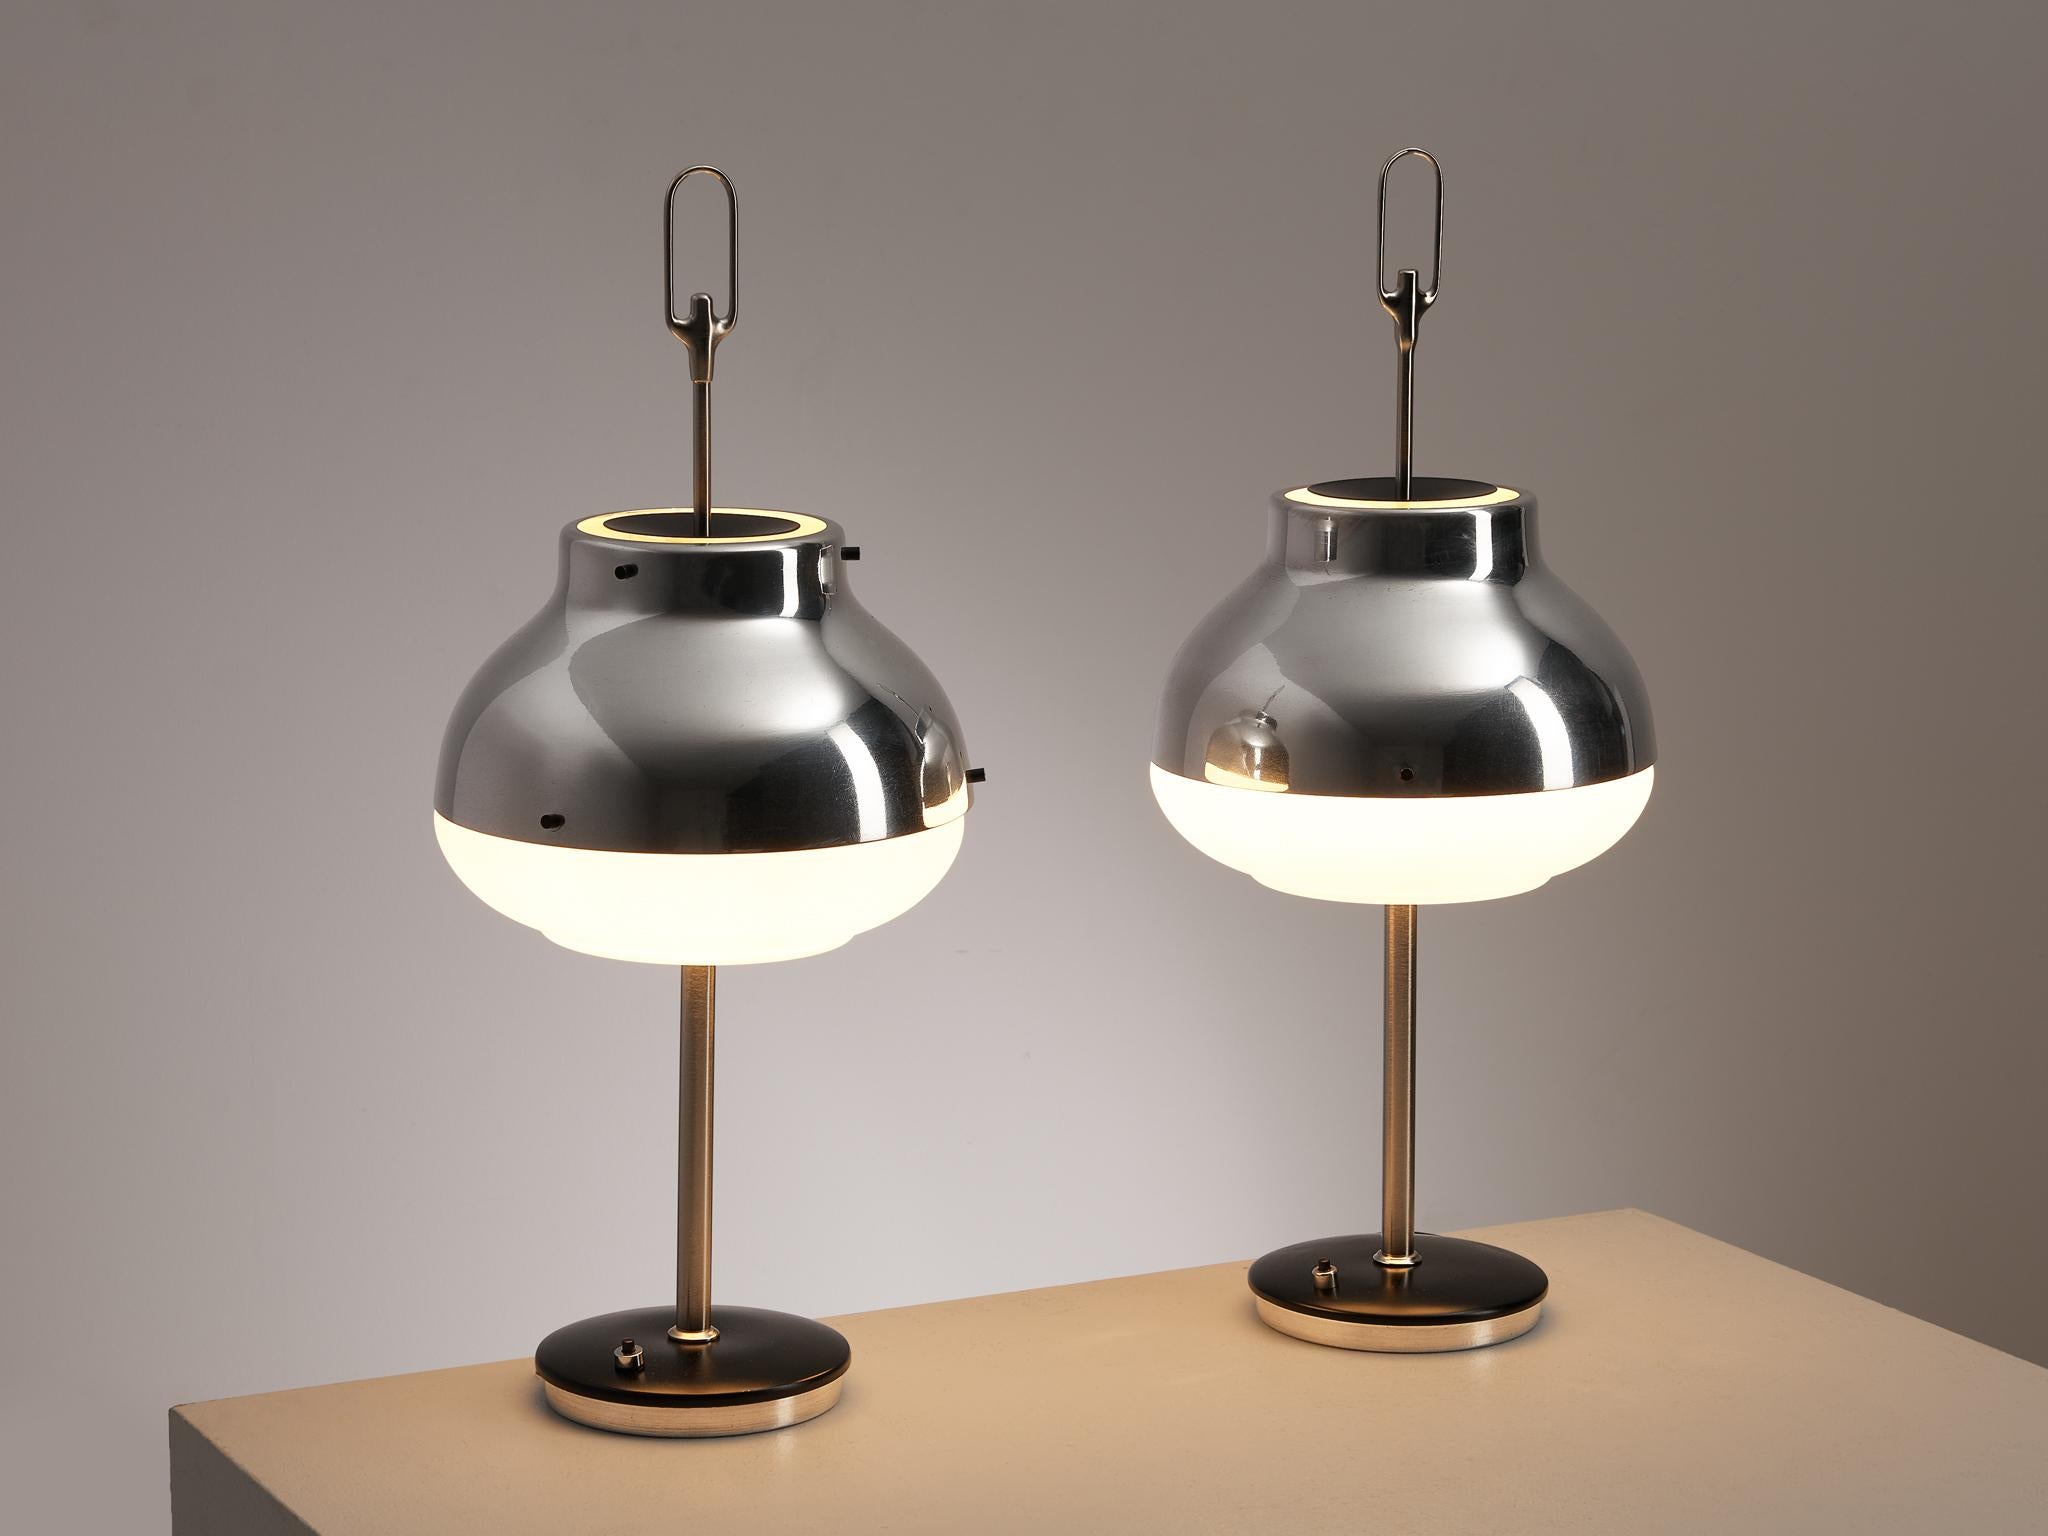 Oscar Torlasco for Lumi, table lamps, model 648, brushed aluminum, opaline glass, Italy, 1960s

Wonderful table lamps designed by Oscar Torlasco for Lumi Milano. Torlasco, who created many innovative lighting designs for Lumi, made this lamp in